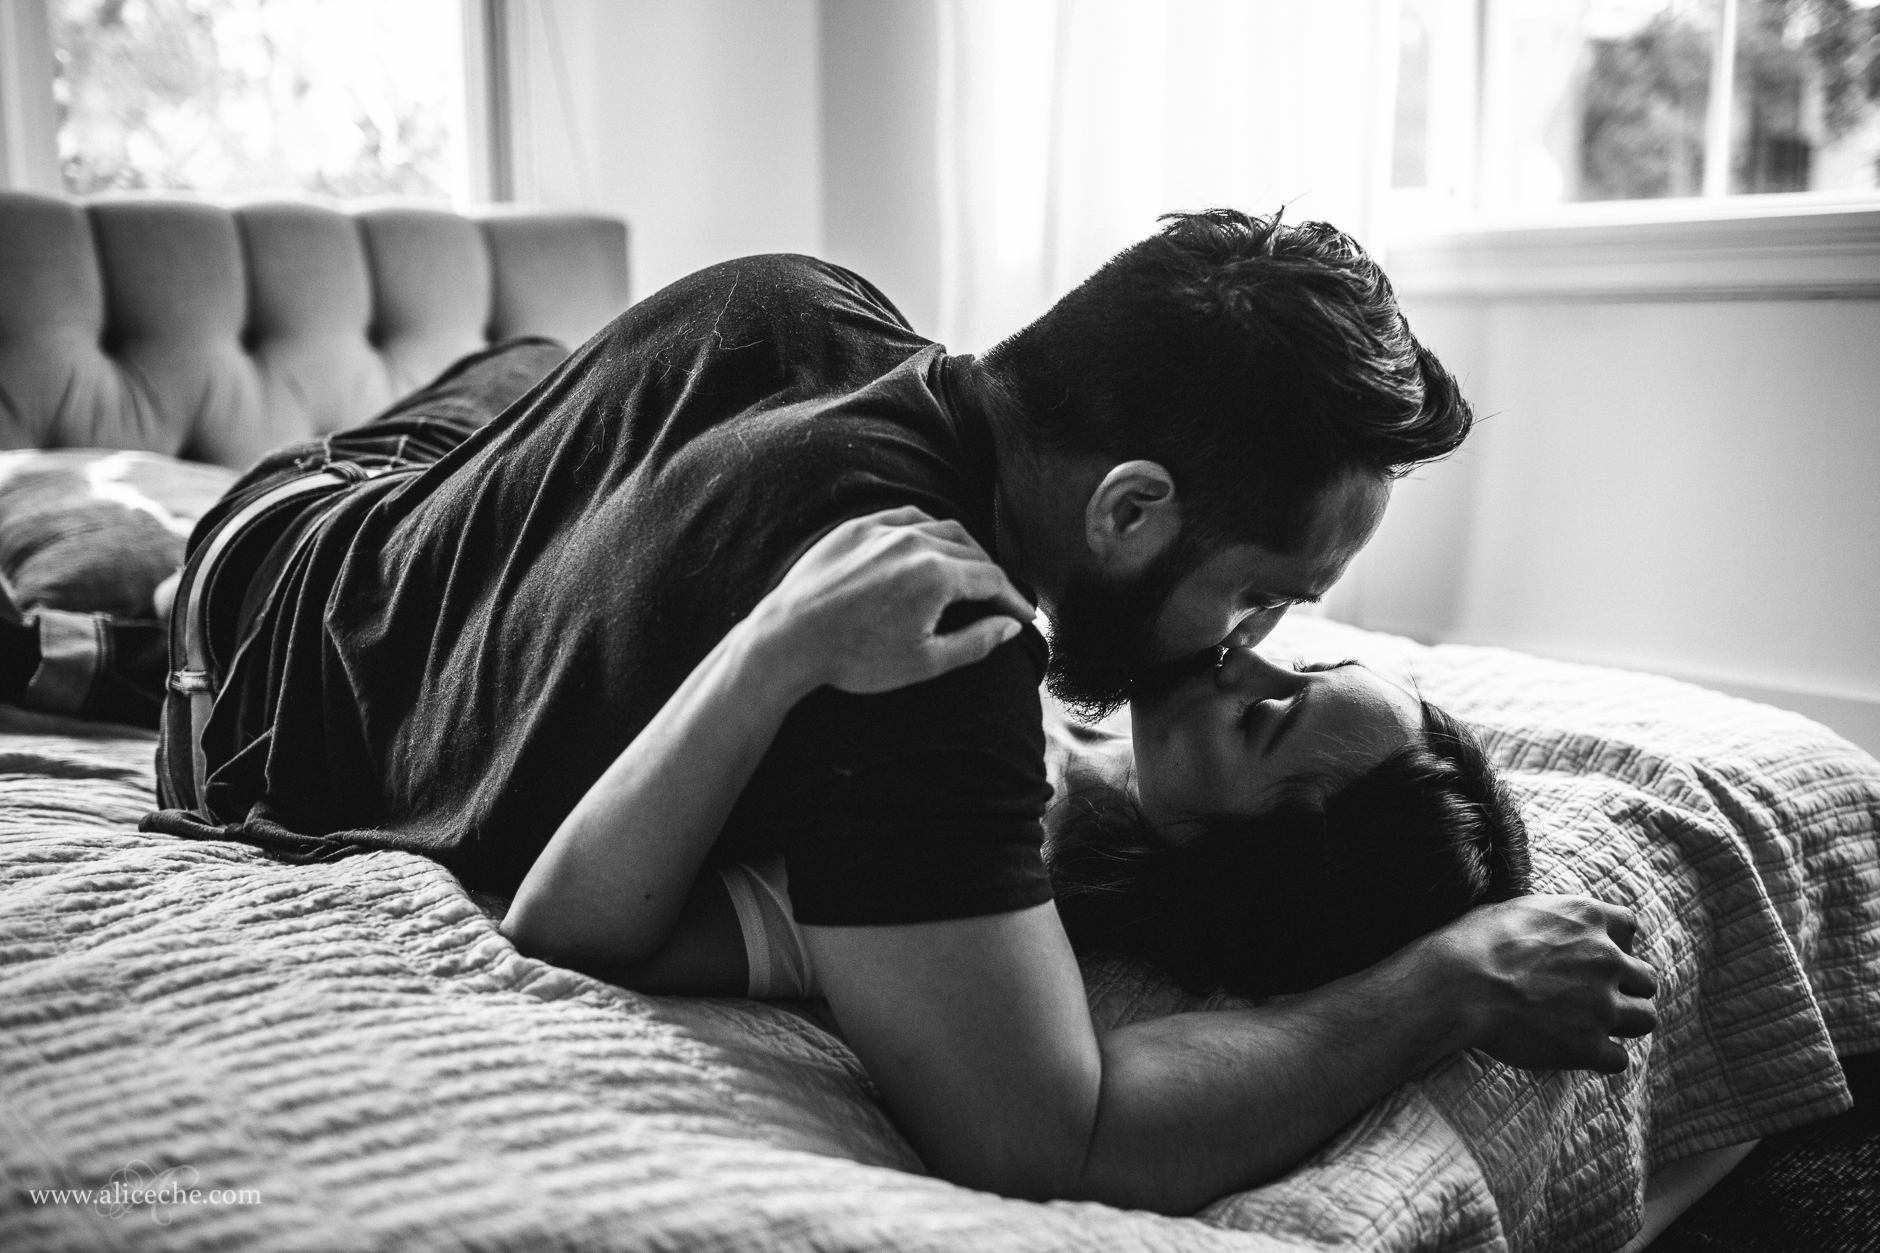 alice-che-photography-8-reasons-to-have-an-in-home-engagement-session-bay-area-in-bed